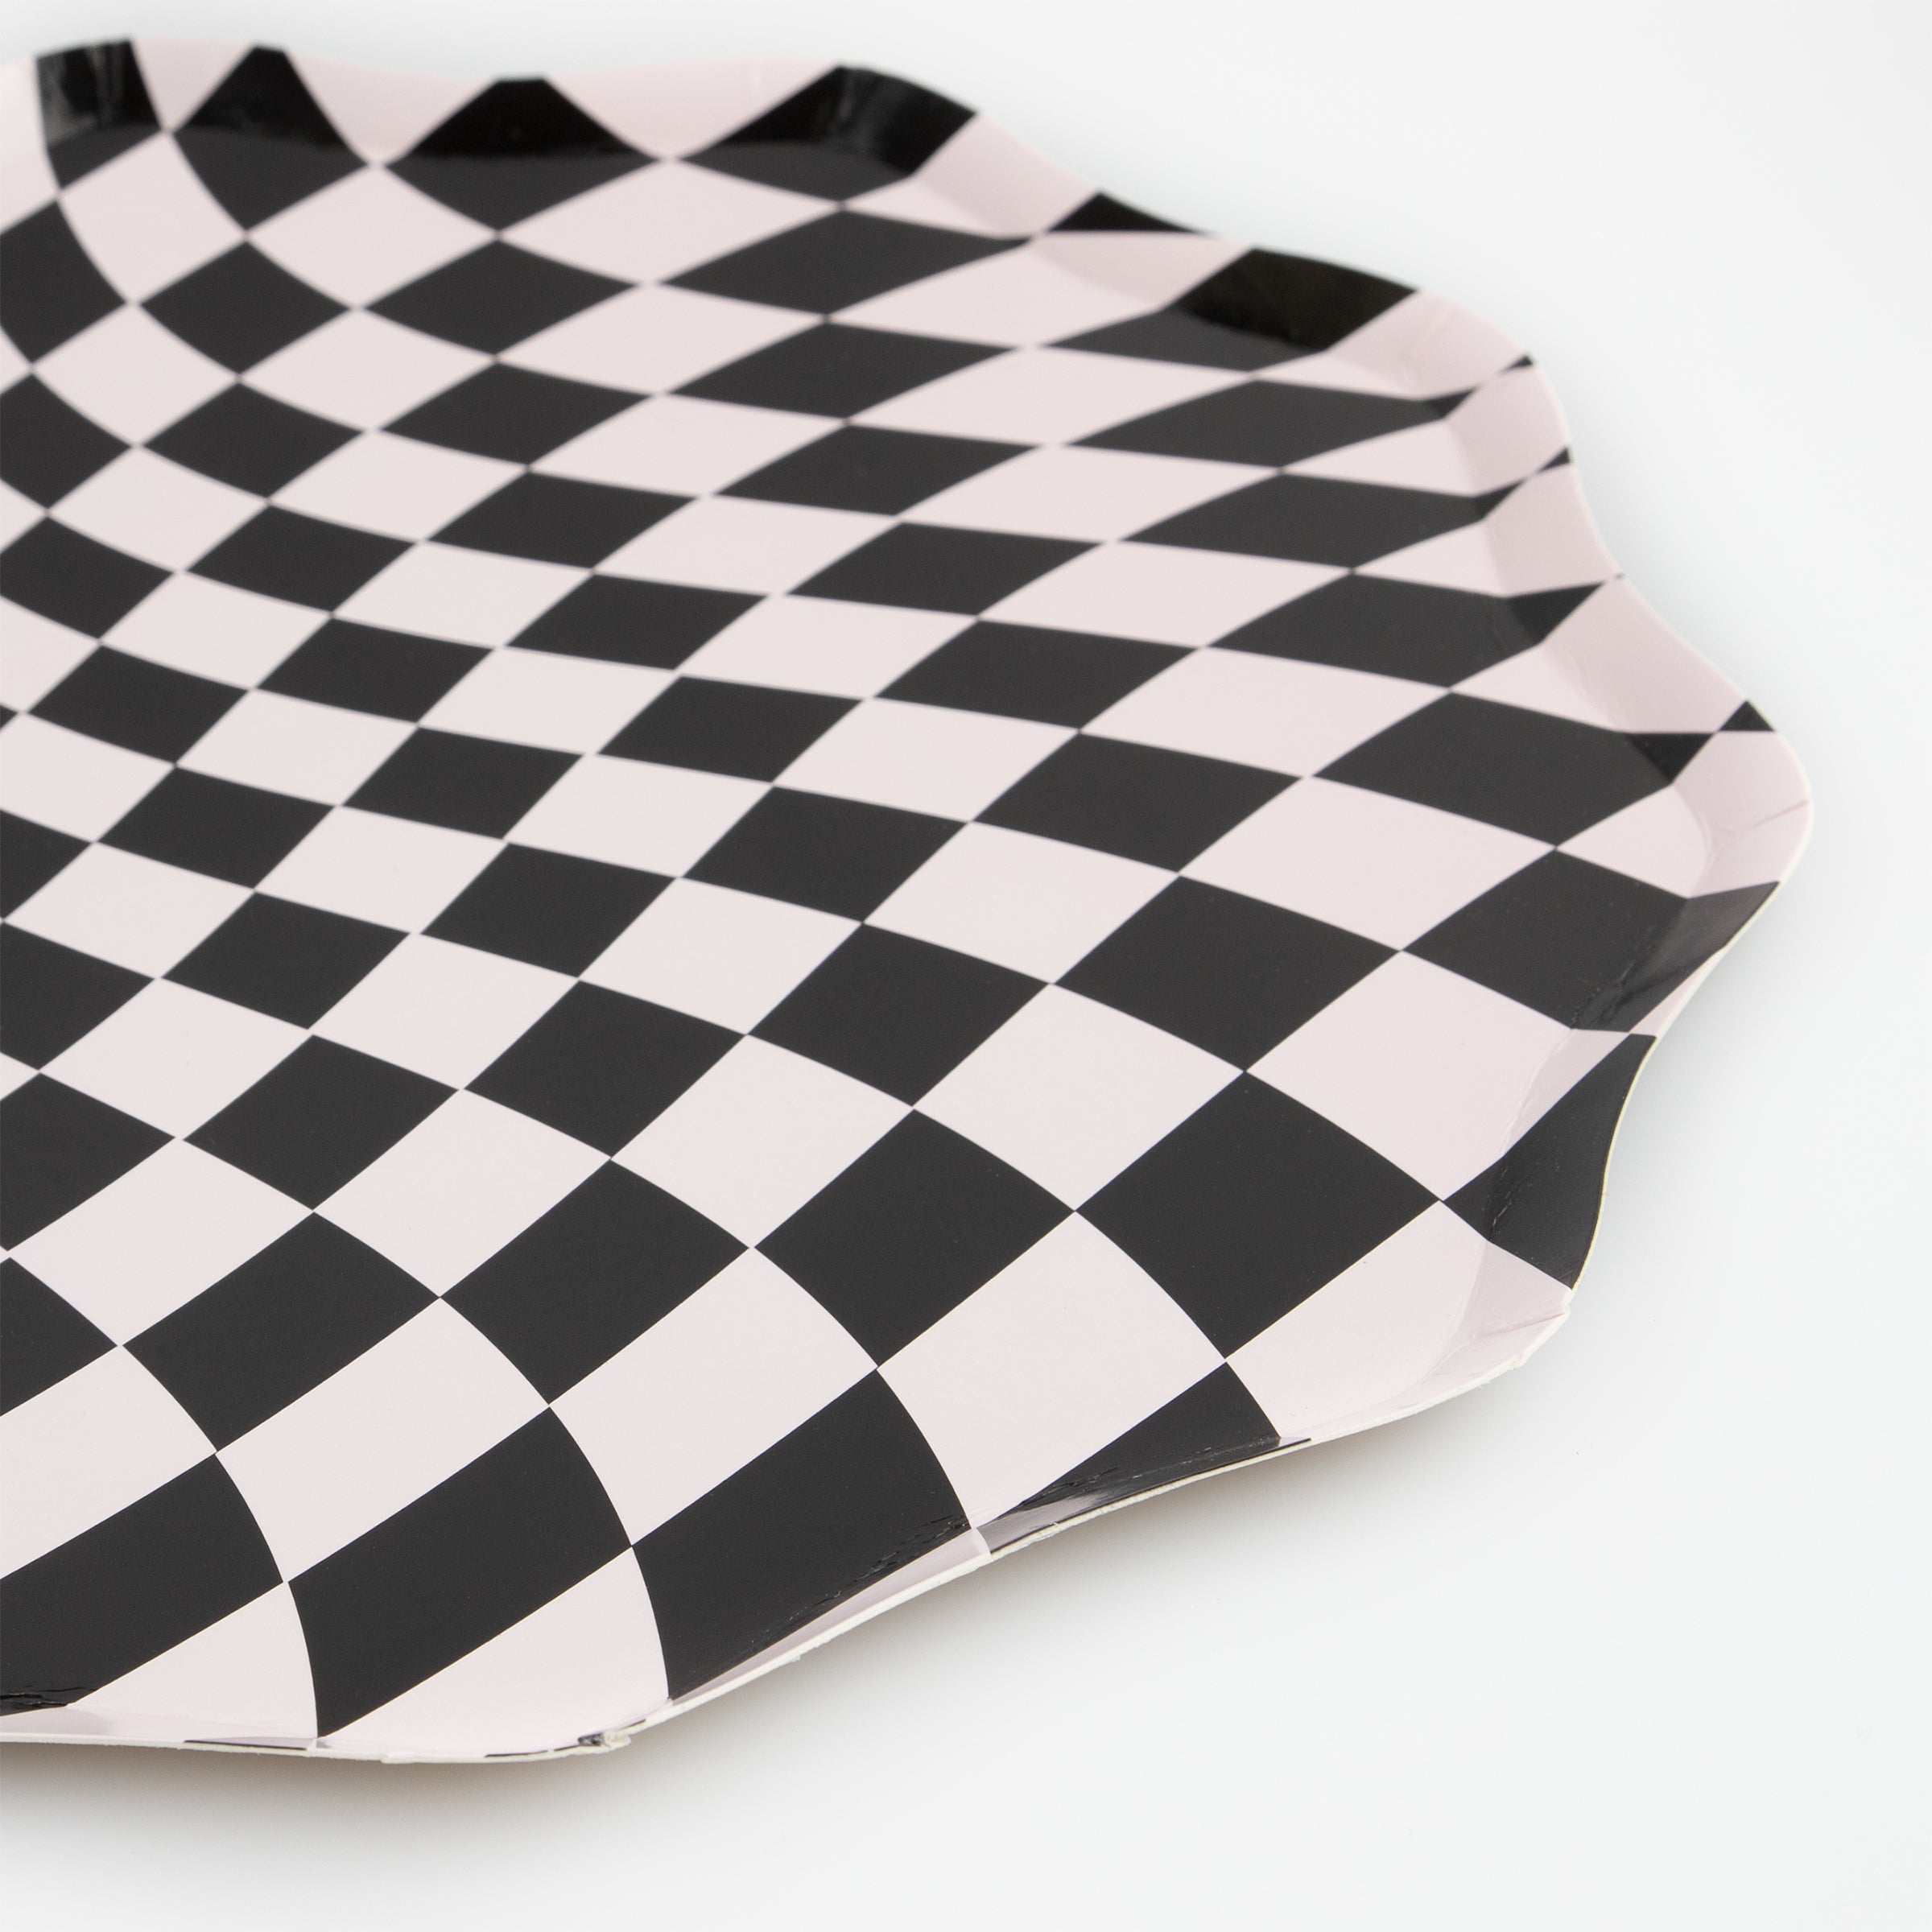 Our party plates are perfect for Halloween party ideas, as the 60s psychedelic checkered pattern looks amazing.